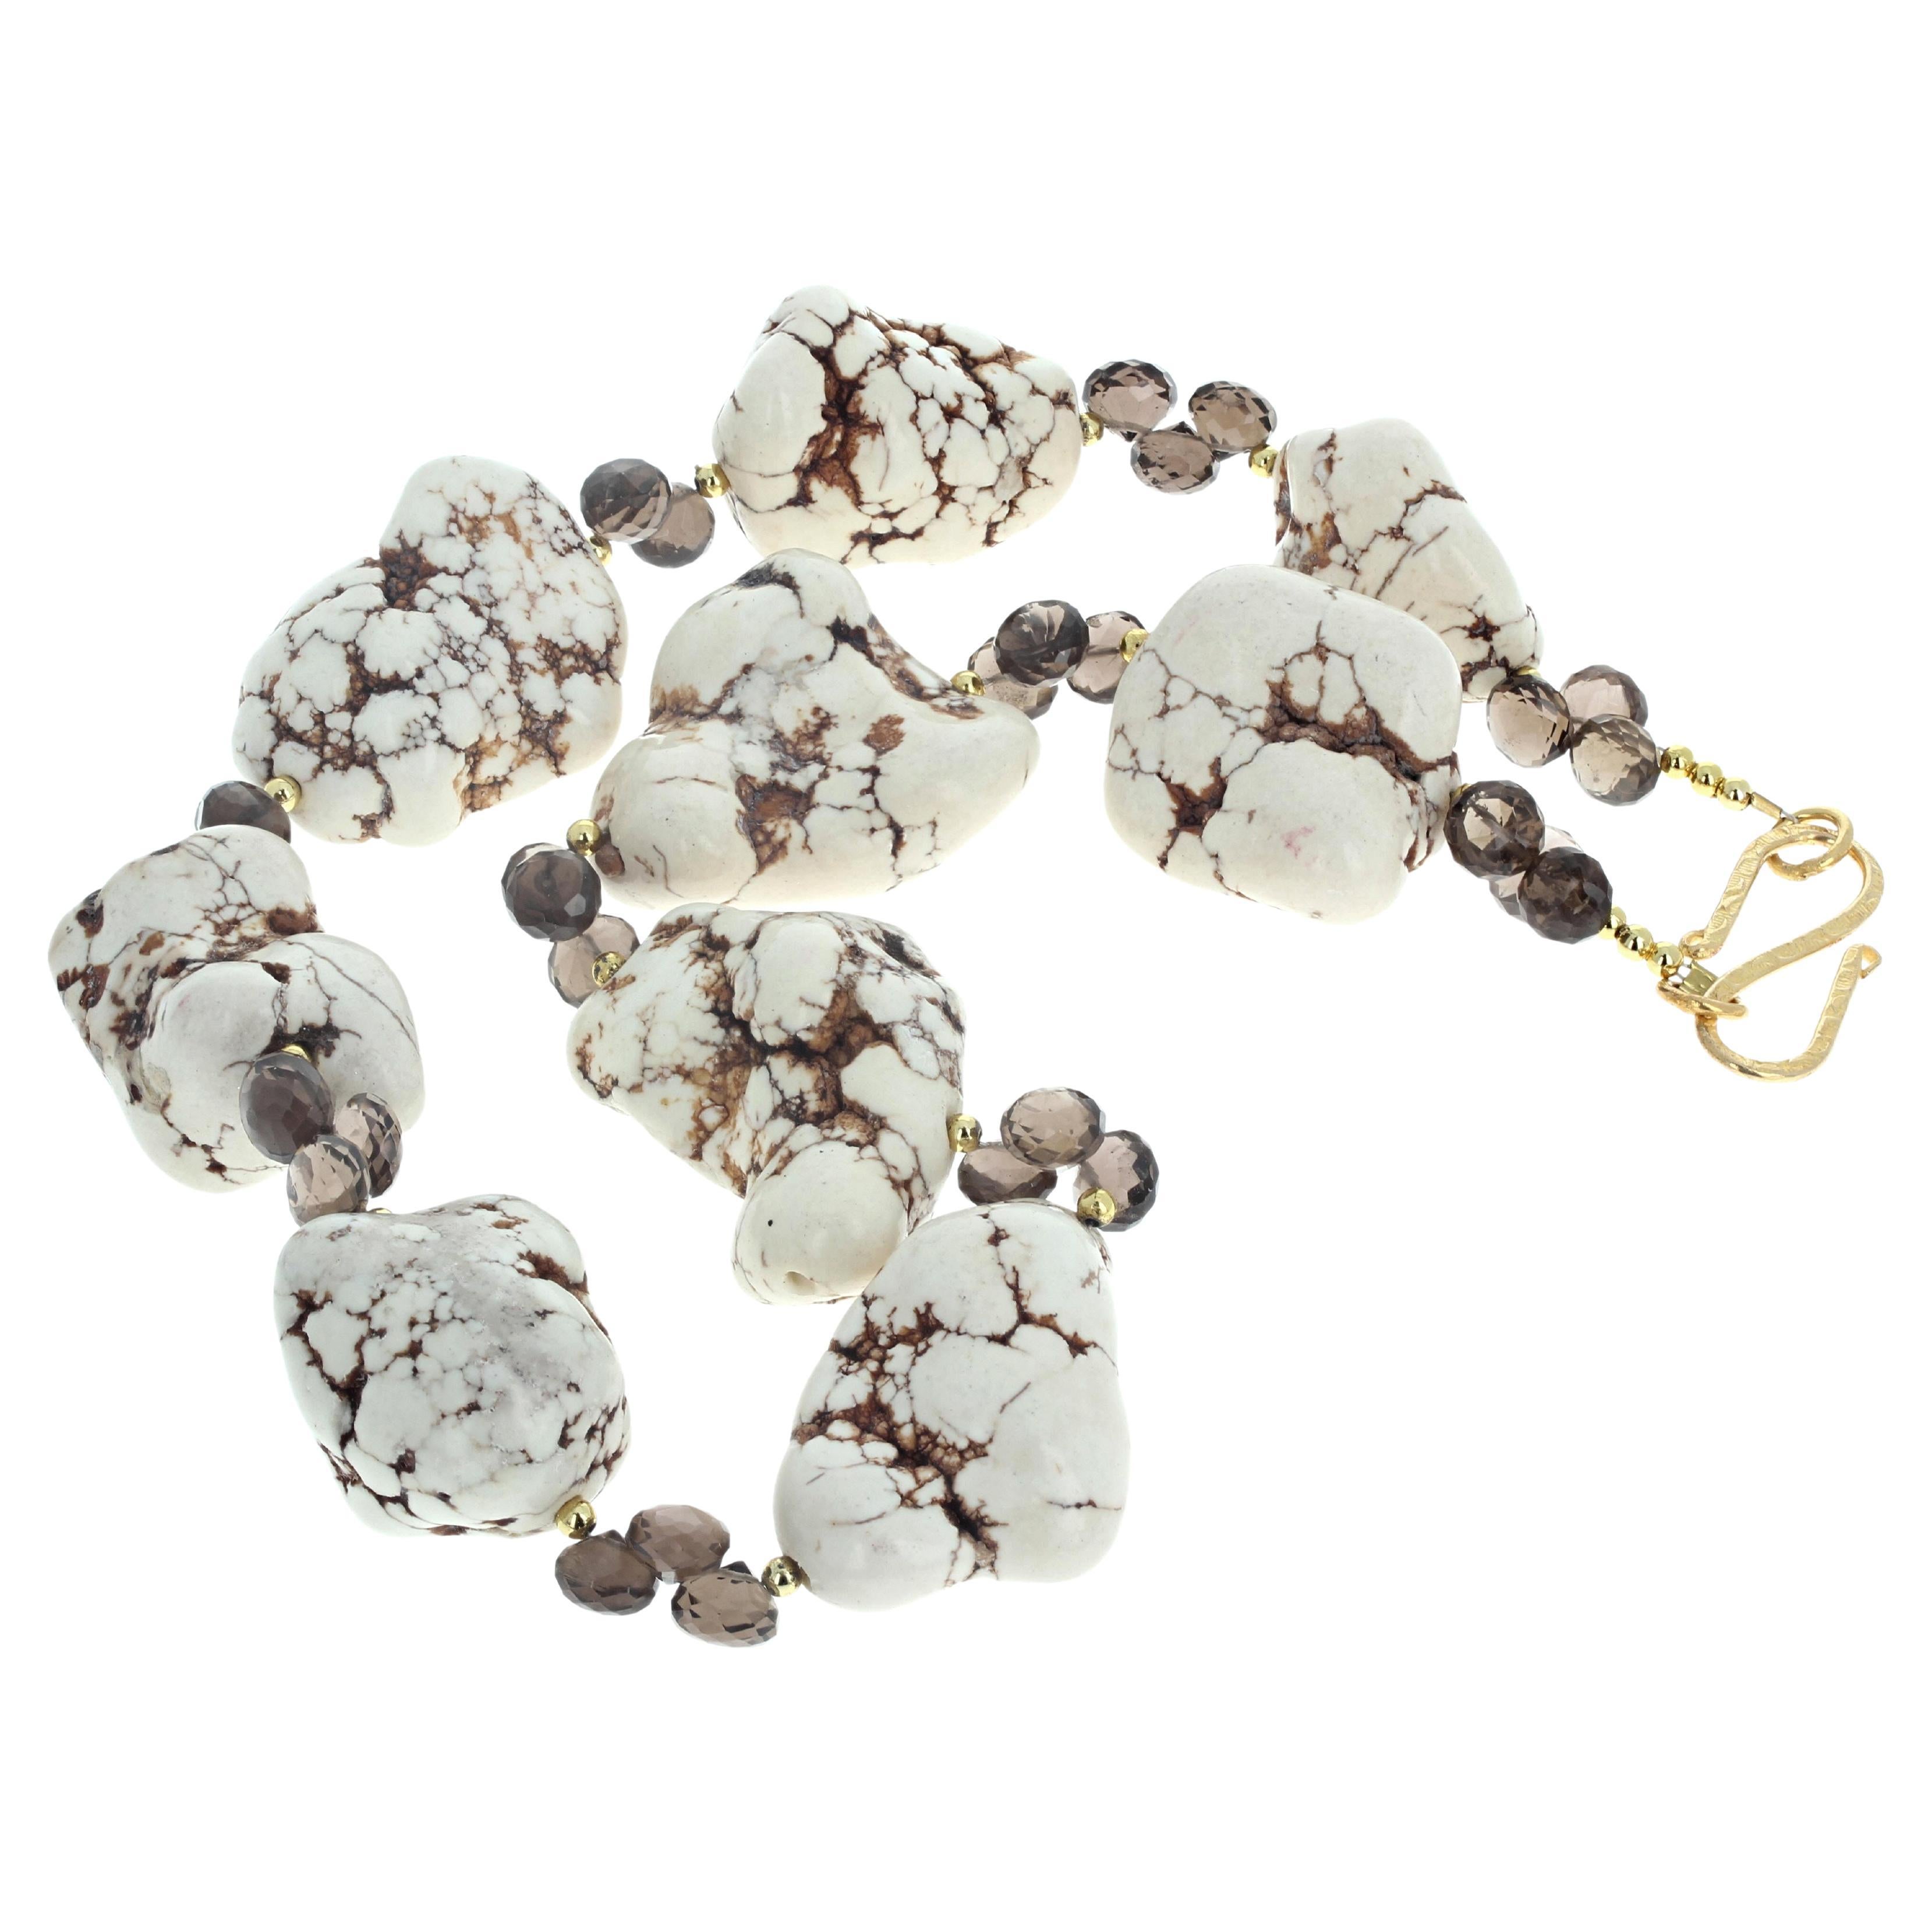 Know as Howlite Crystal Beads - Creamy White Brown Vein Beads - these are polished - and enhanced by sparkling natural highly polished real Smoky Quartz - so they sit comfortably and artistically around your neck in this 20 inch long necklace.  The